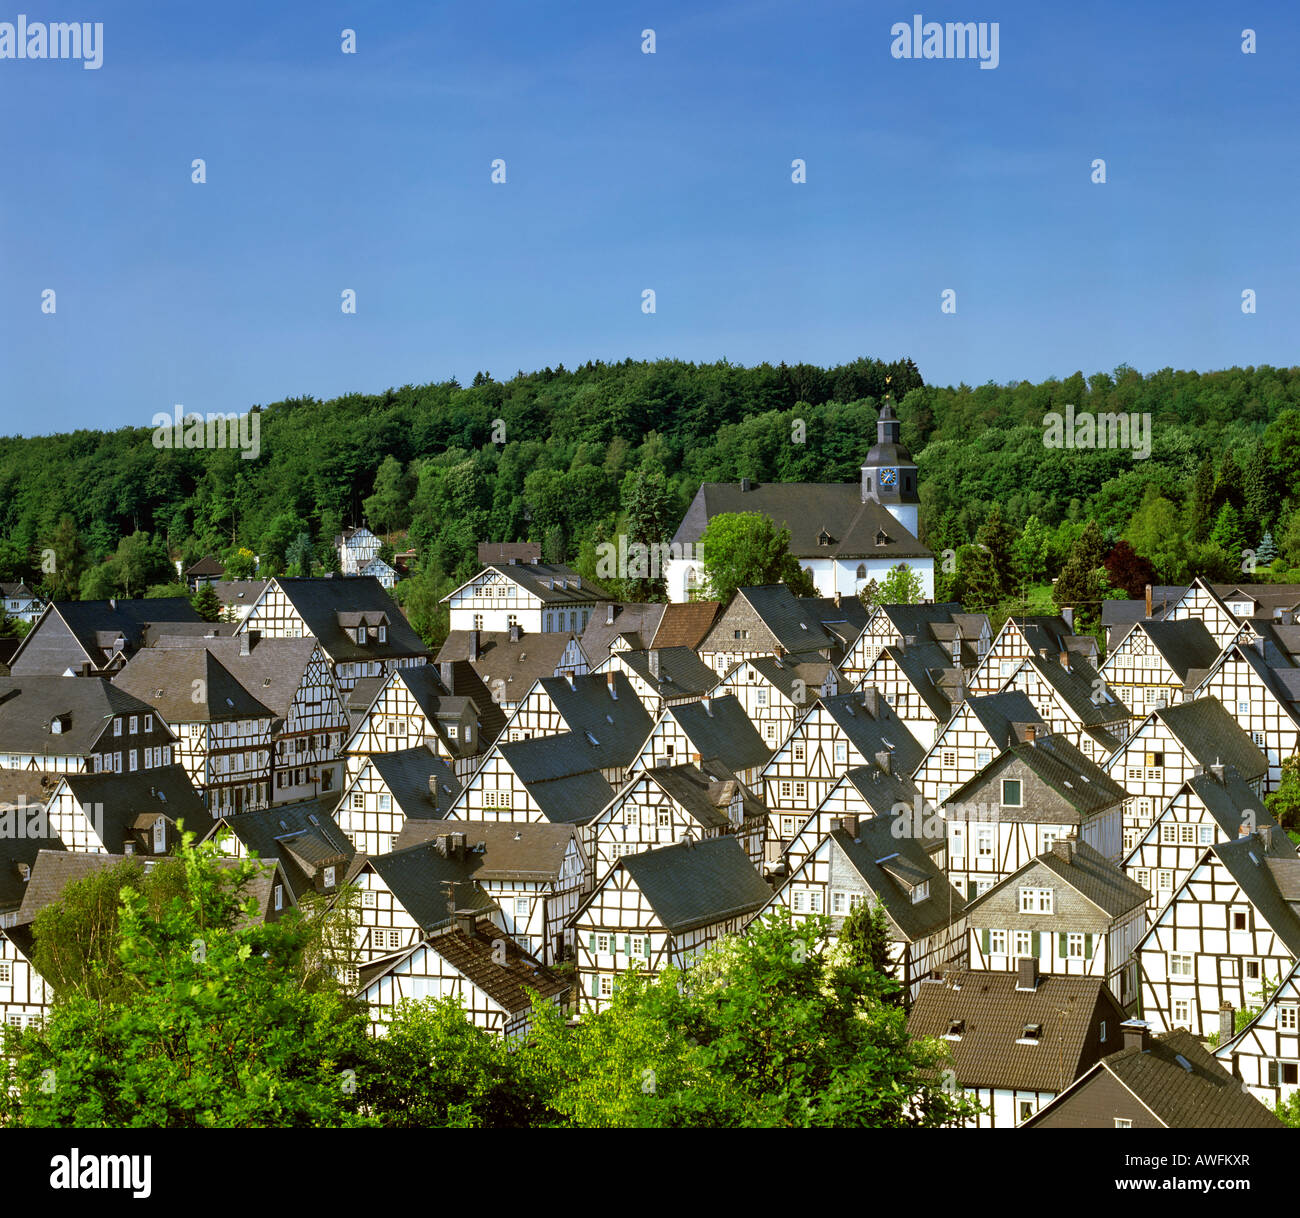 Fachwerk-style houses in the historic centre of the town of Freudenberg, North Rhine-Westphalia, Germany, Europe Stock Photo